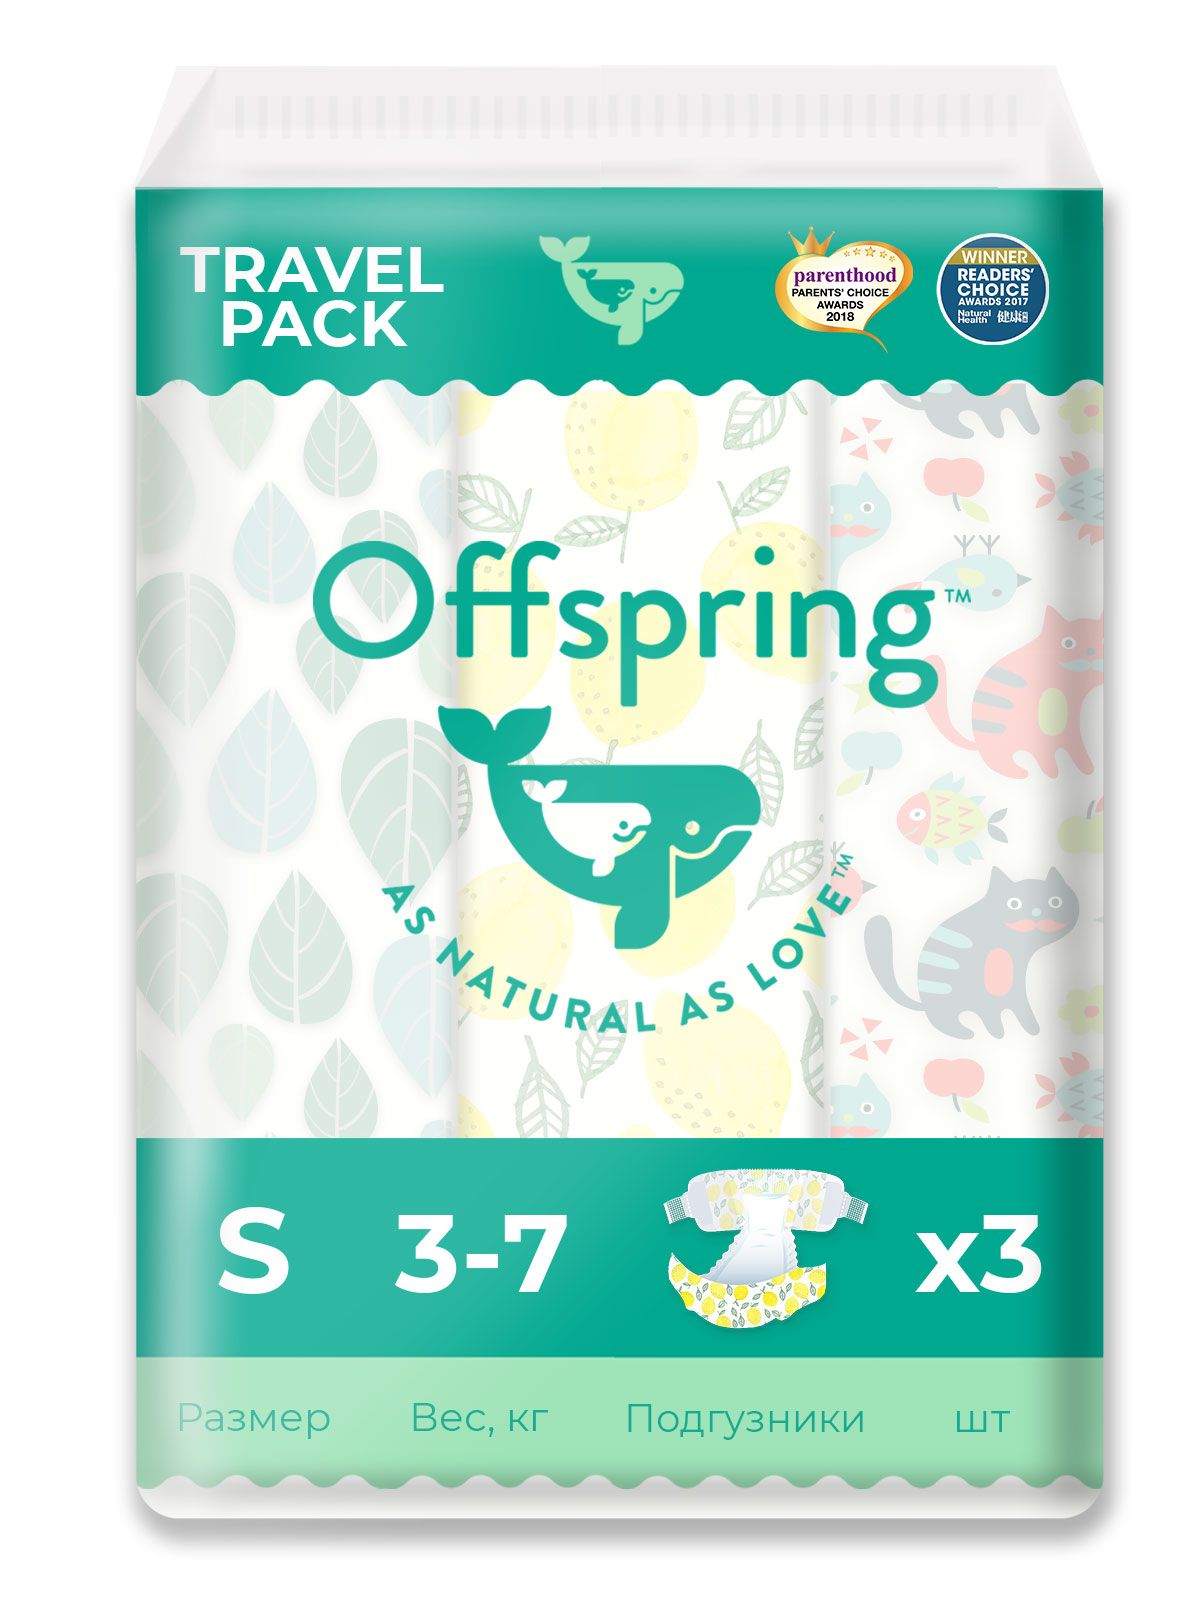  Offspring Travel pack, S 3-7 . 3 . 3 